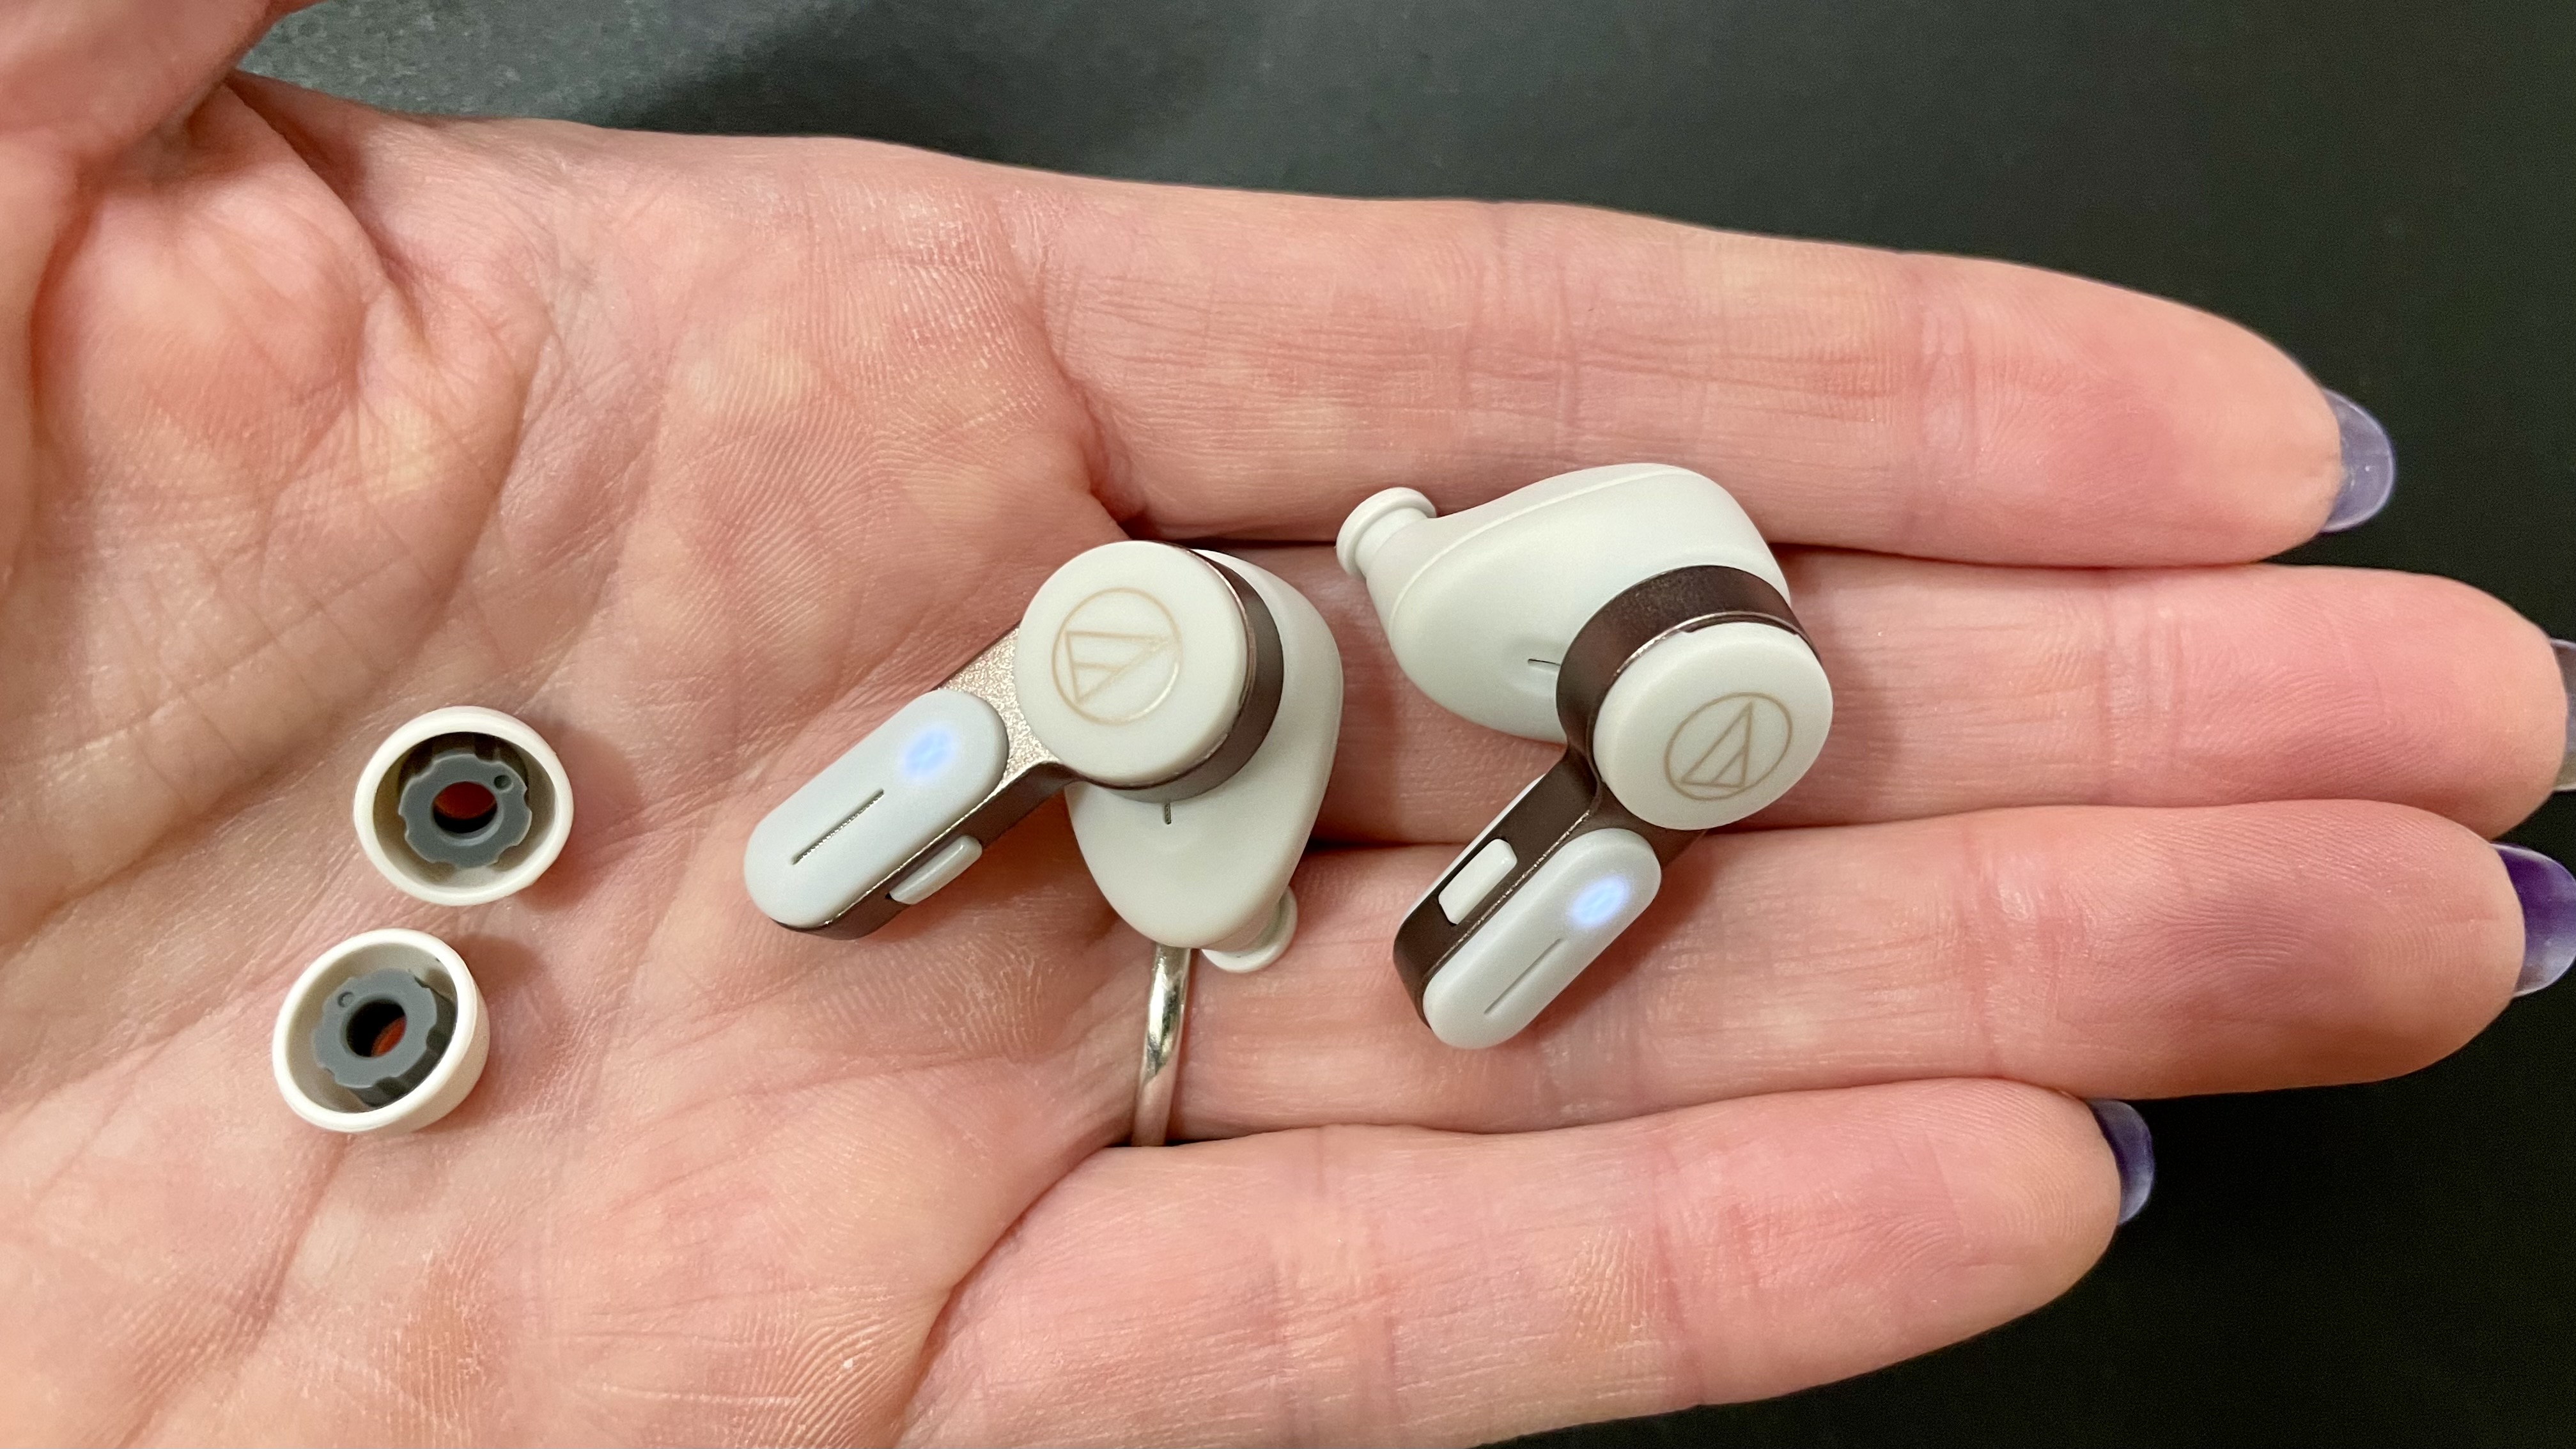 Audio-Technica ATH-TWX7 held in a hand, with earbud tips displayed